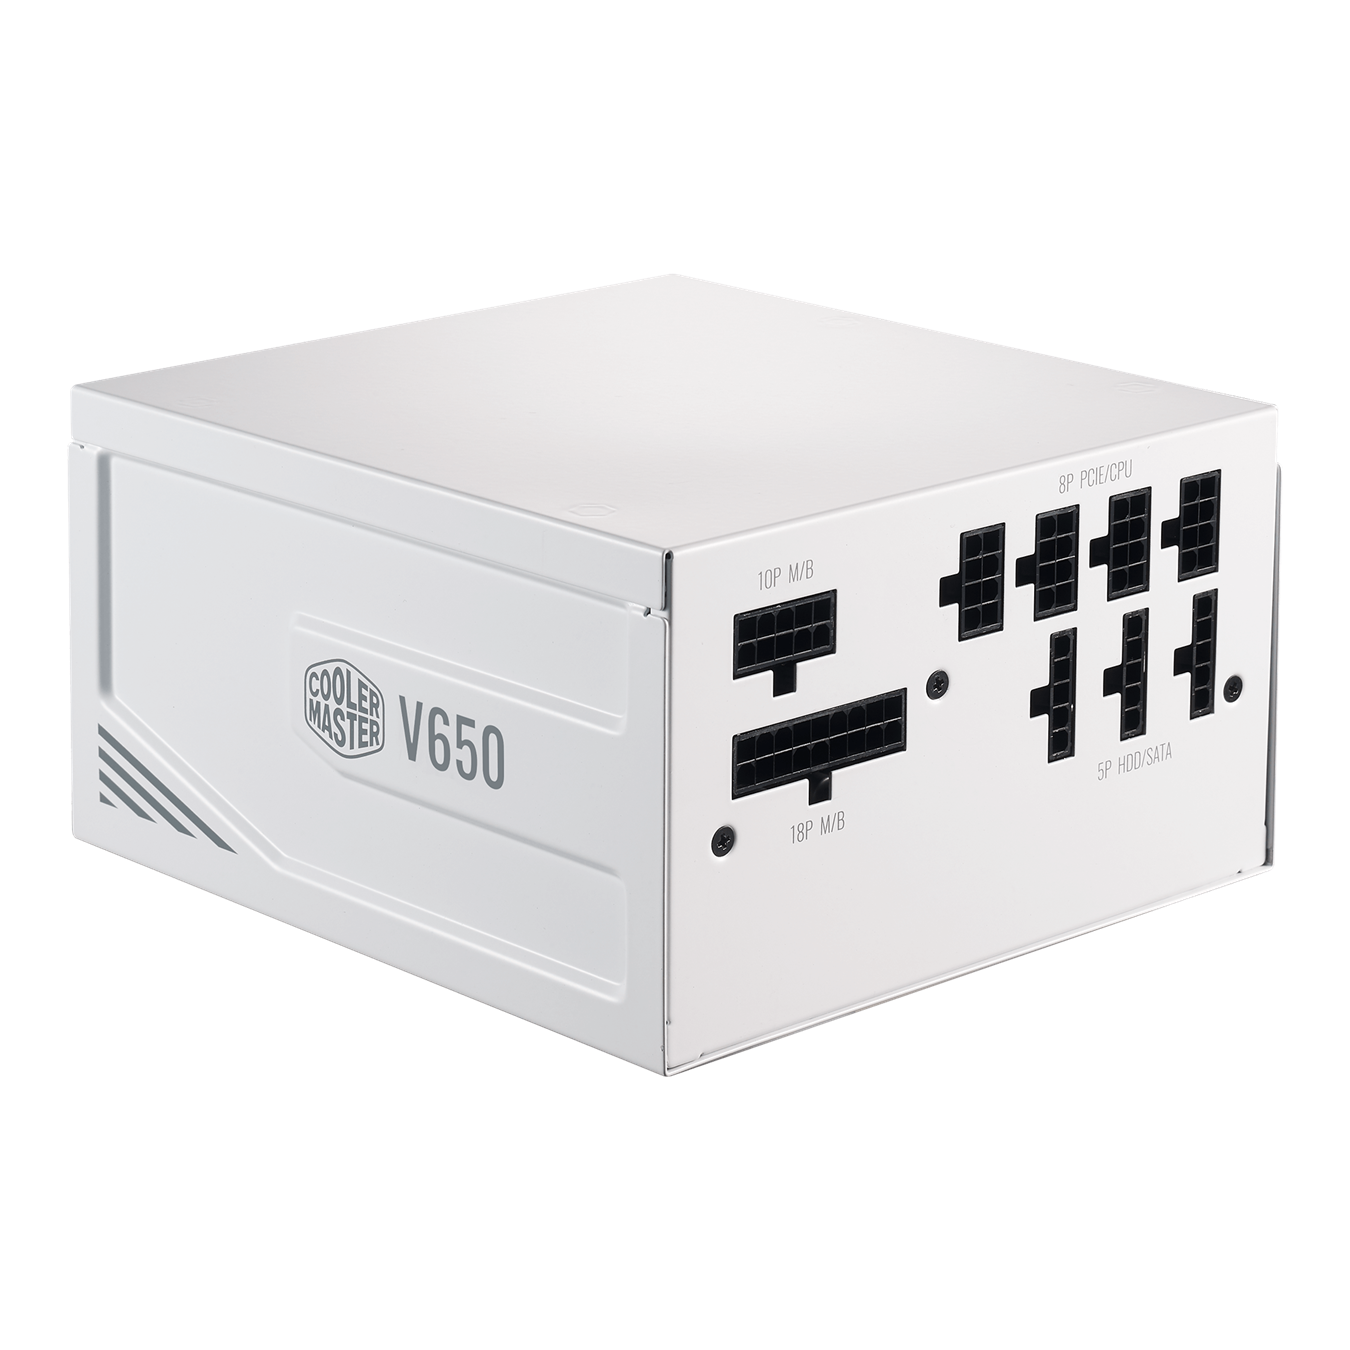 V650 Gold V2 White Edition - fully customizable cabling reduces clutter, increases airflow